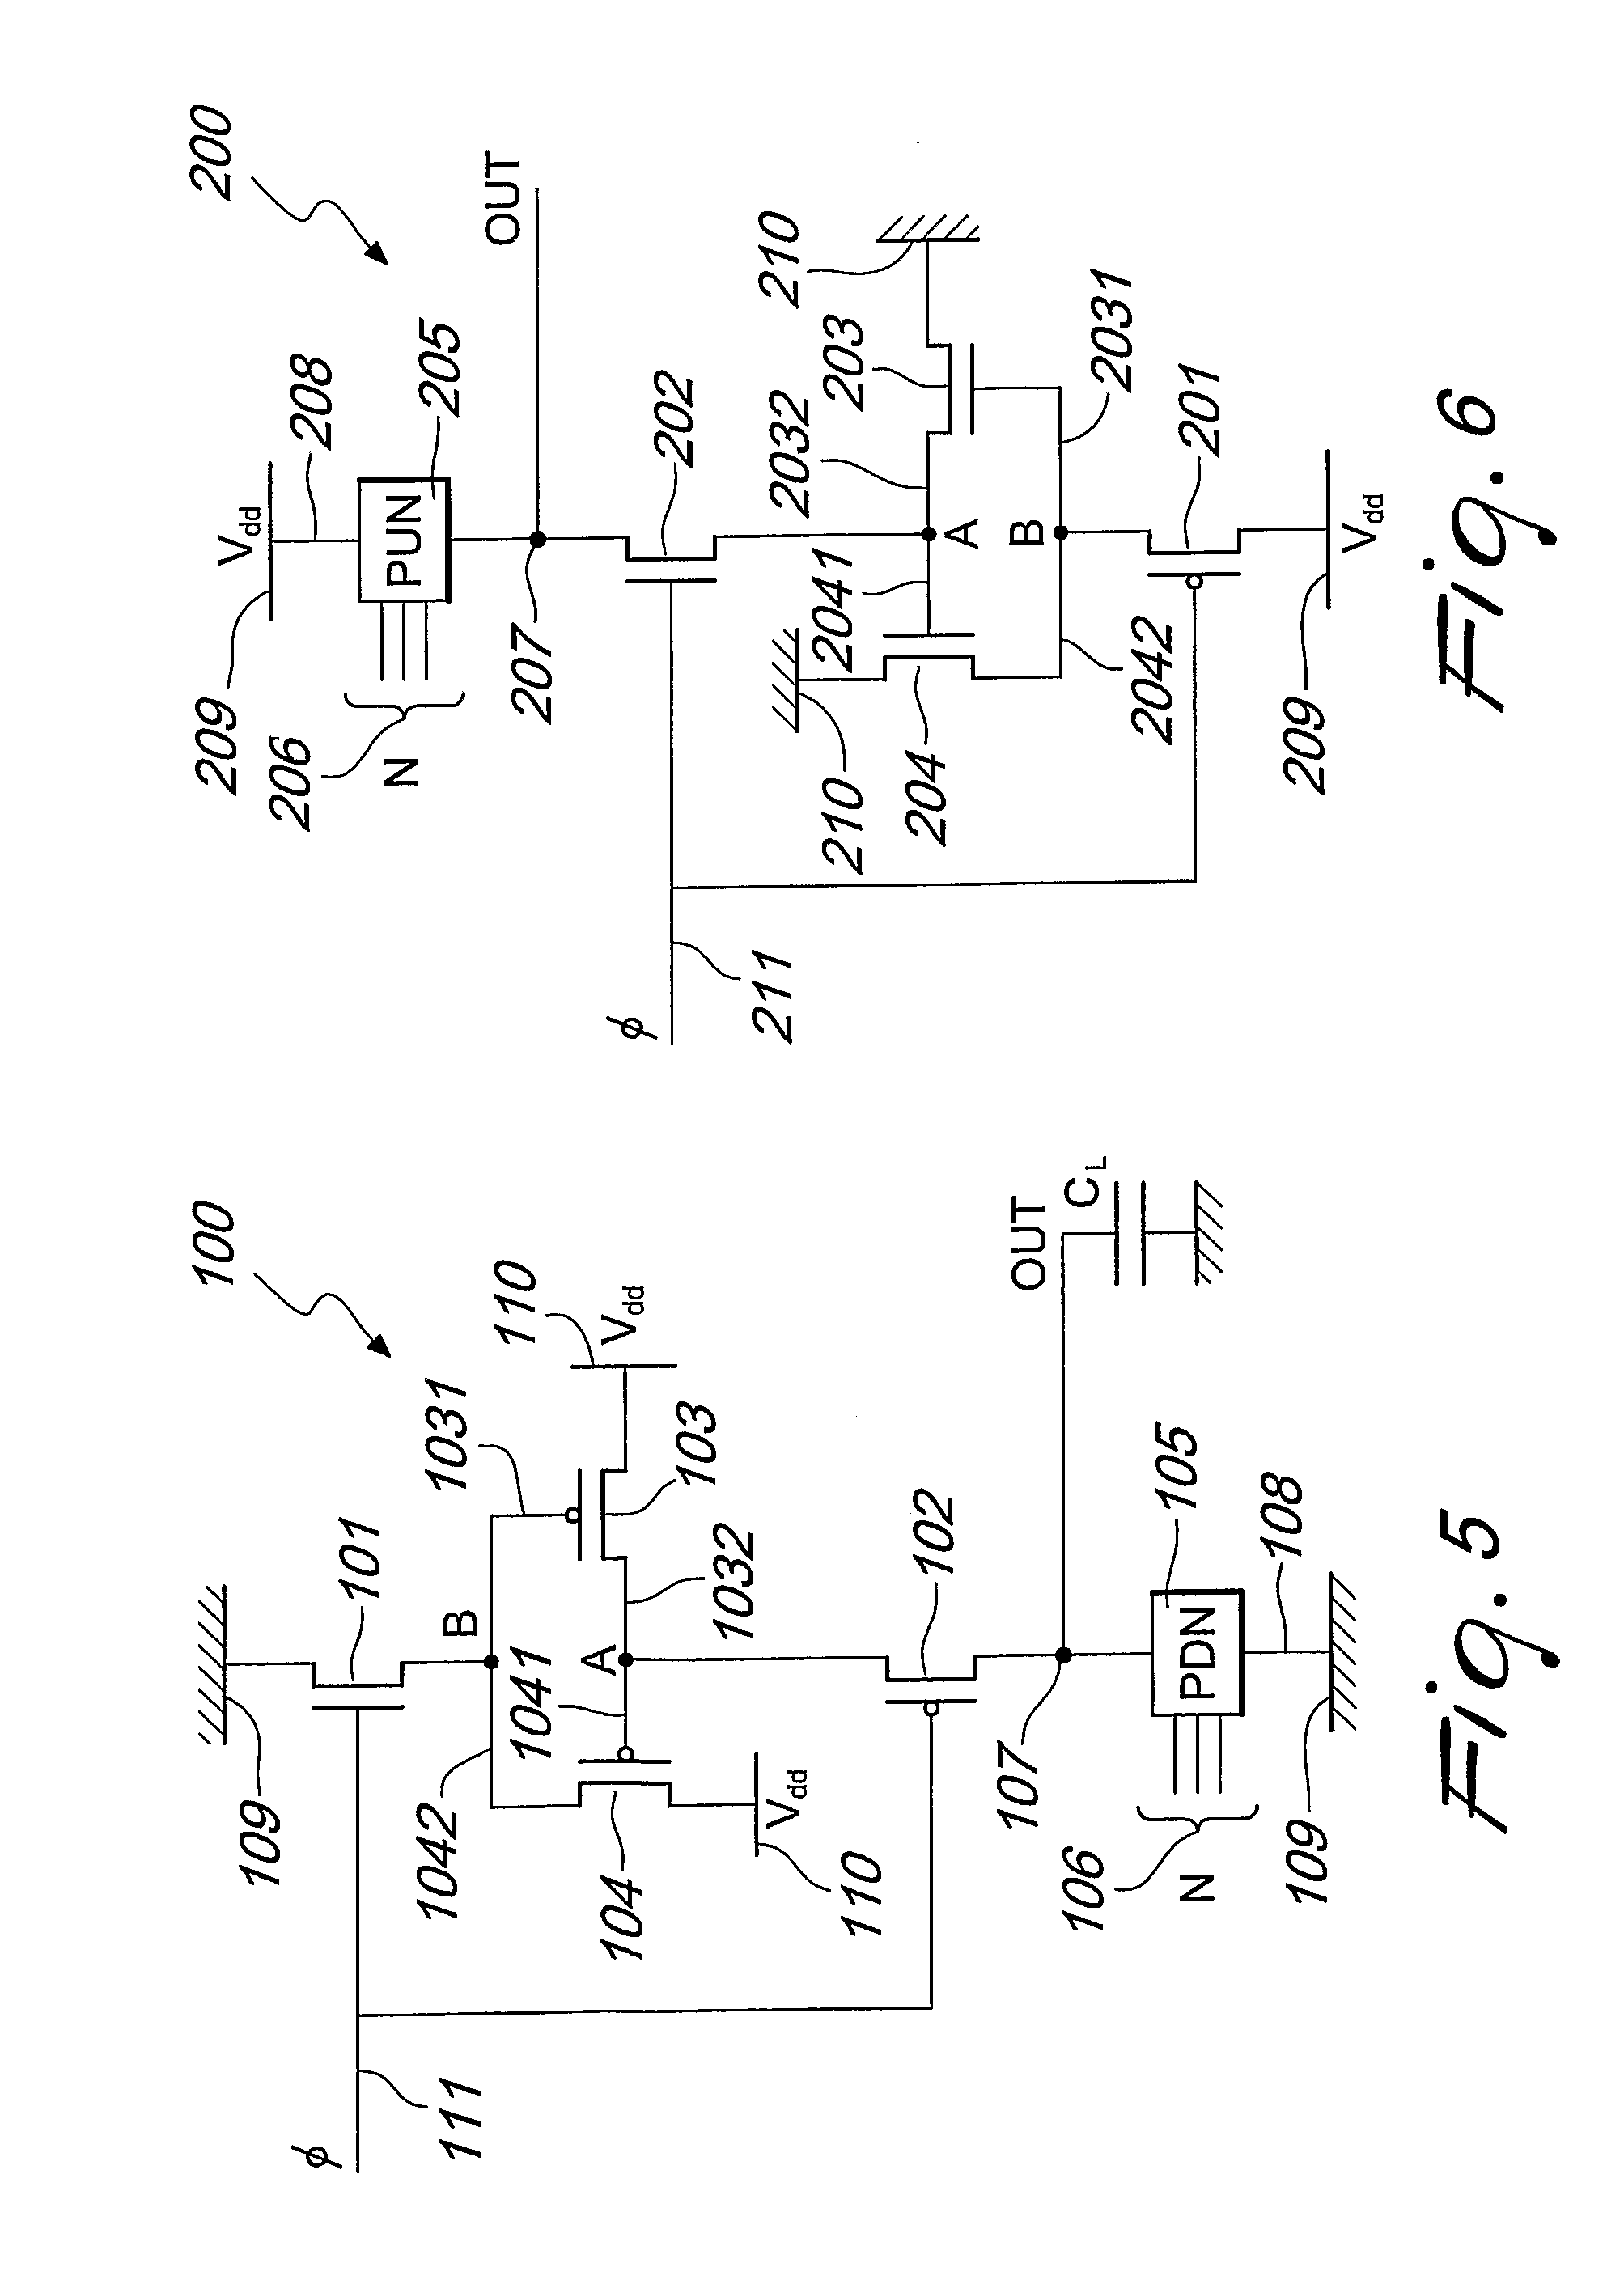 Logic gate with a reduced number of switches, especially for applications in integrated circuits